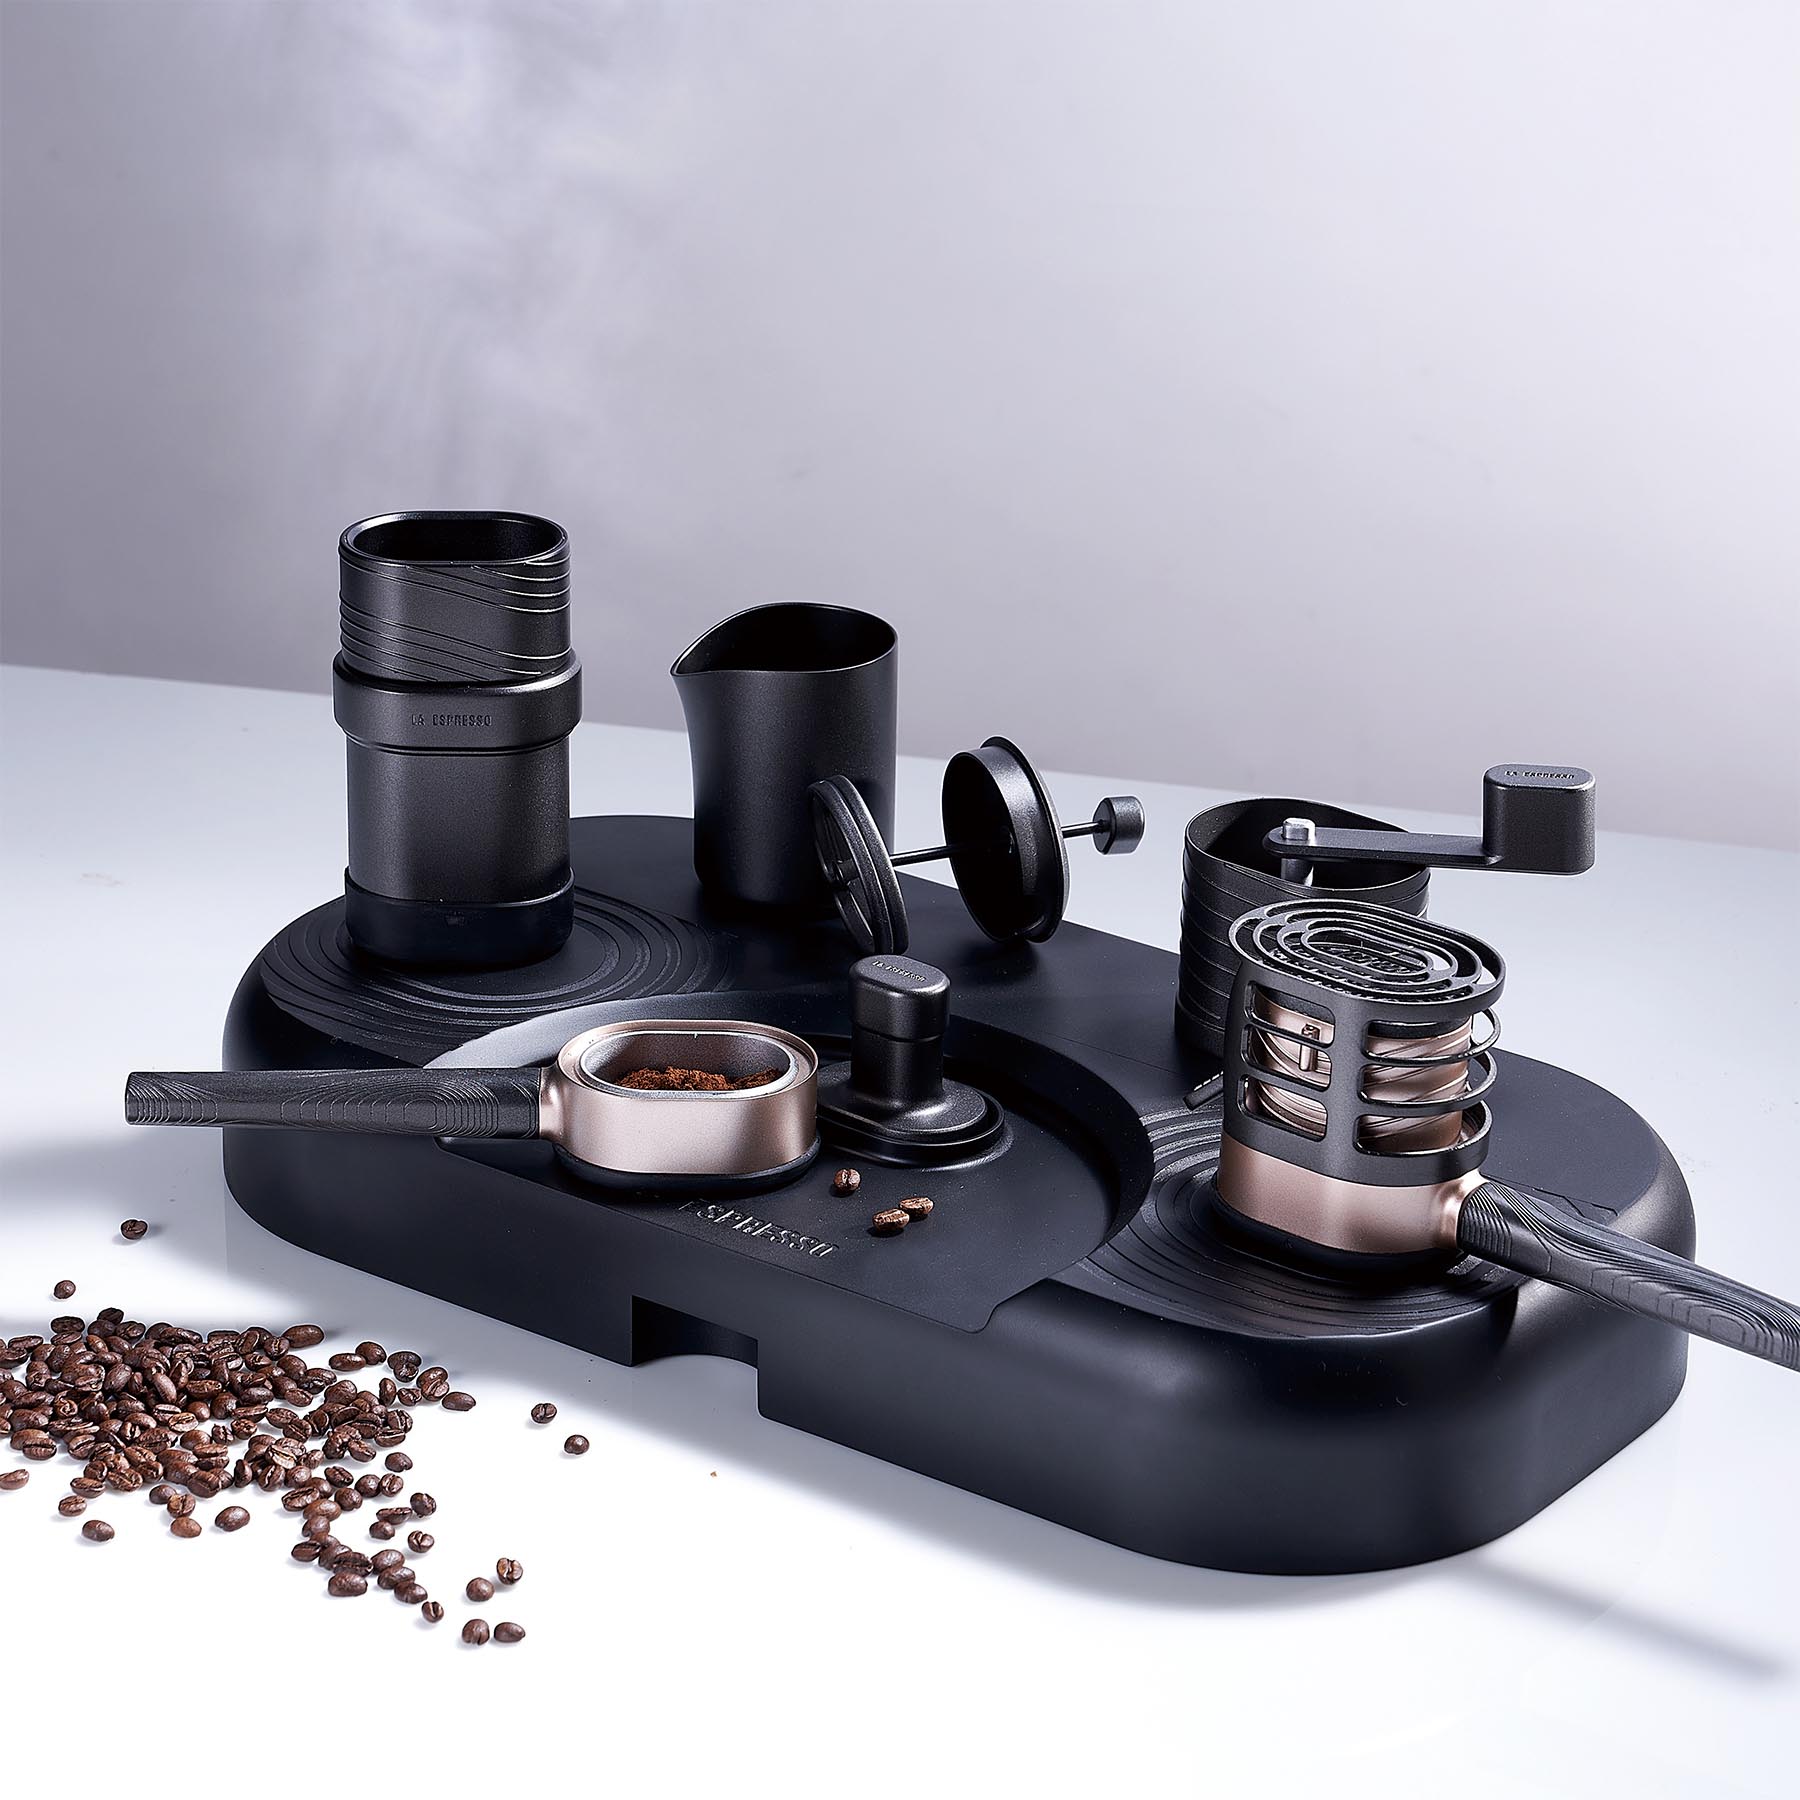 La Espresso is a travel-style coffee set that integrates all the brewing coffee processes from heating, grinding beans, extracting, and frothing.